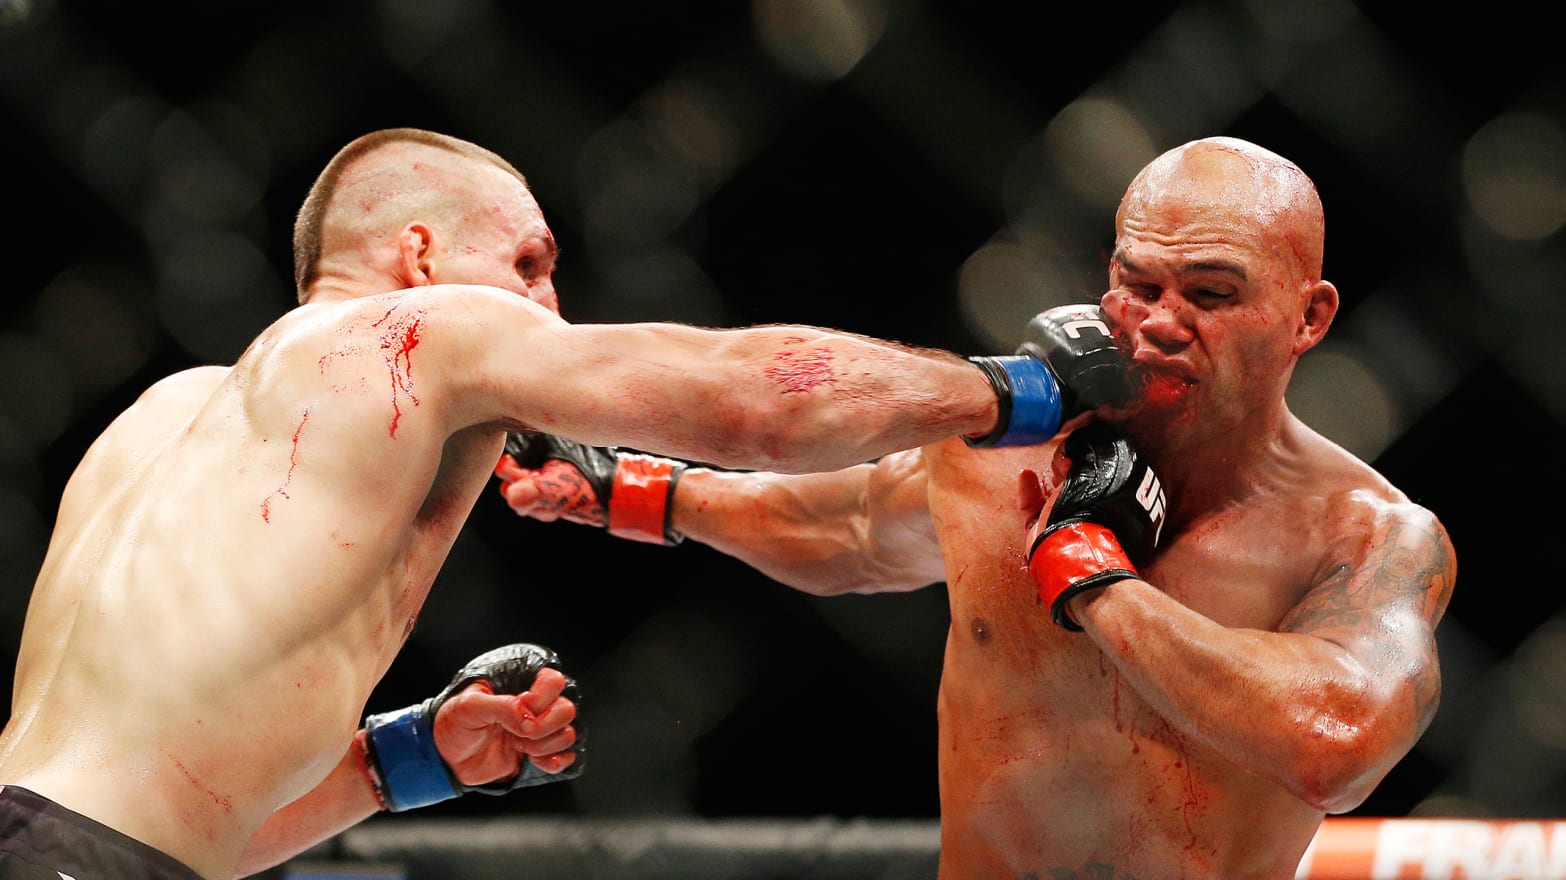 Hey UFC, Back Trauma Stop Brain Bare-knuckle Bring Fights to